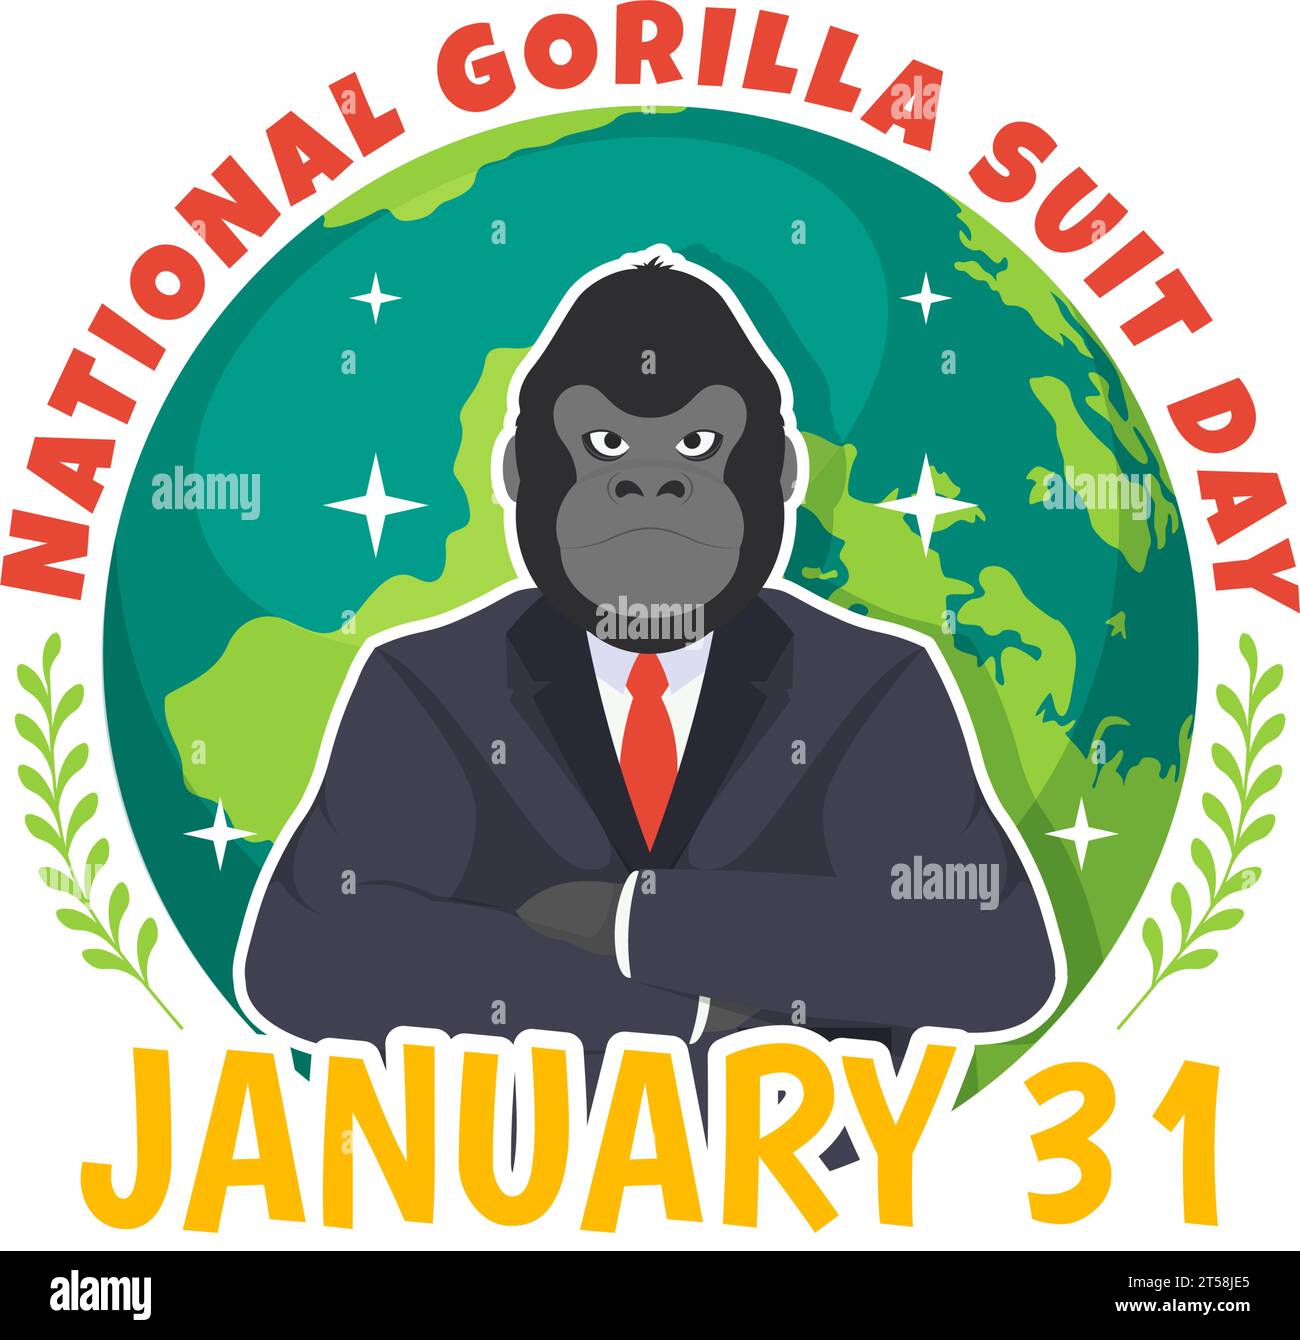 https://c8.alamy.com/comp/2T58JE5/national-gorilla-suit-day-vector-illustration-on-31-january-with-has-the-head-of-a-gorillas-is-dressed-neatly-in-a-suits-and-world-map-in-background-2T58JE5.jpg